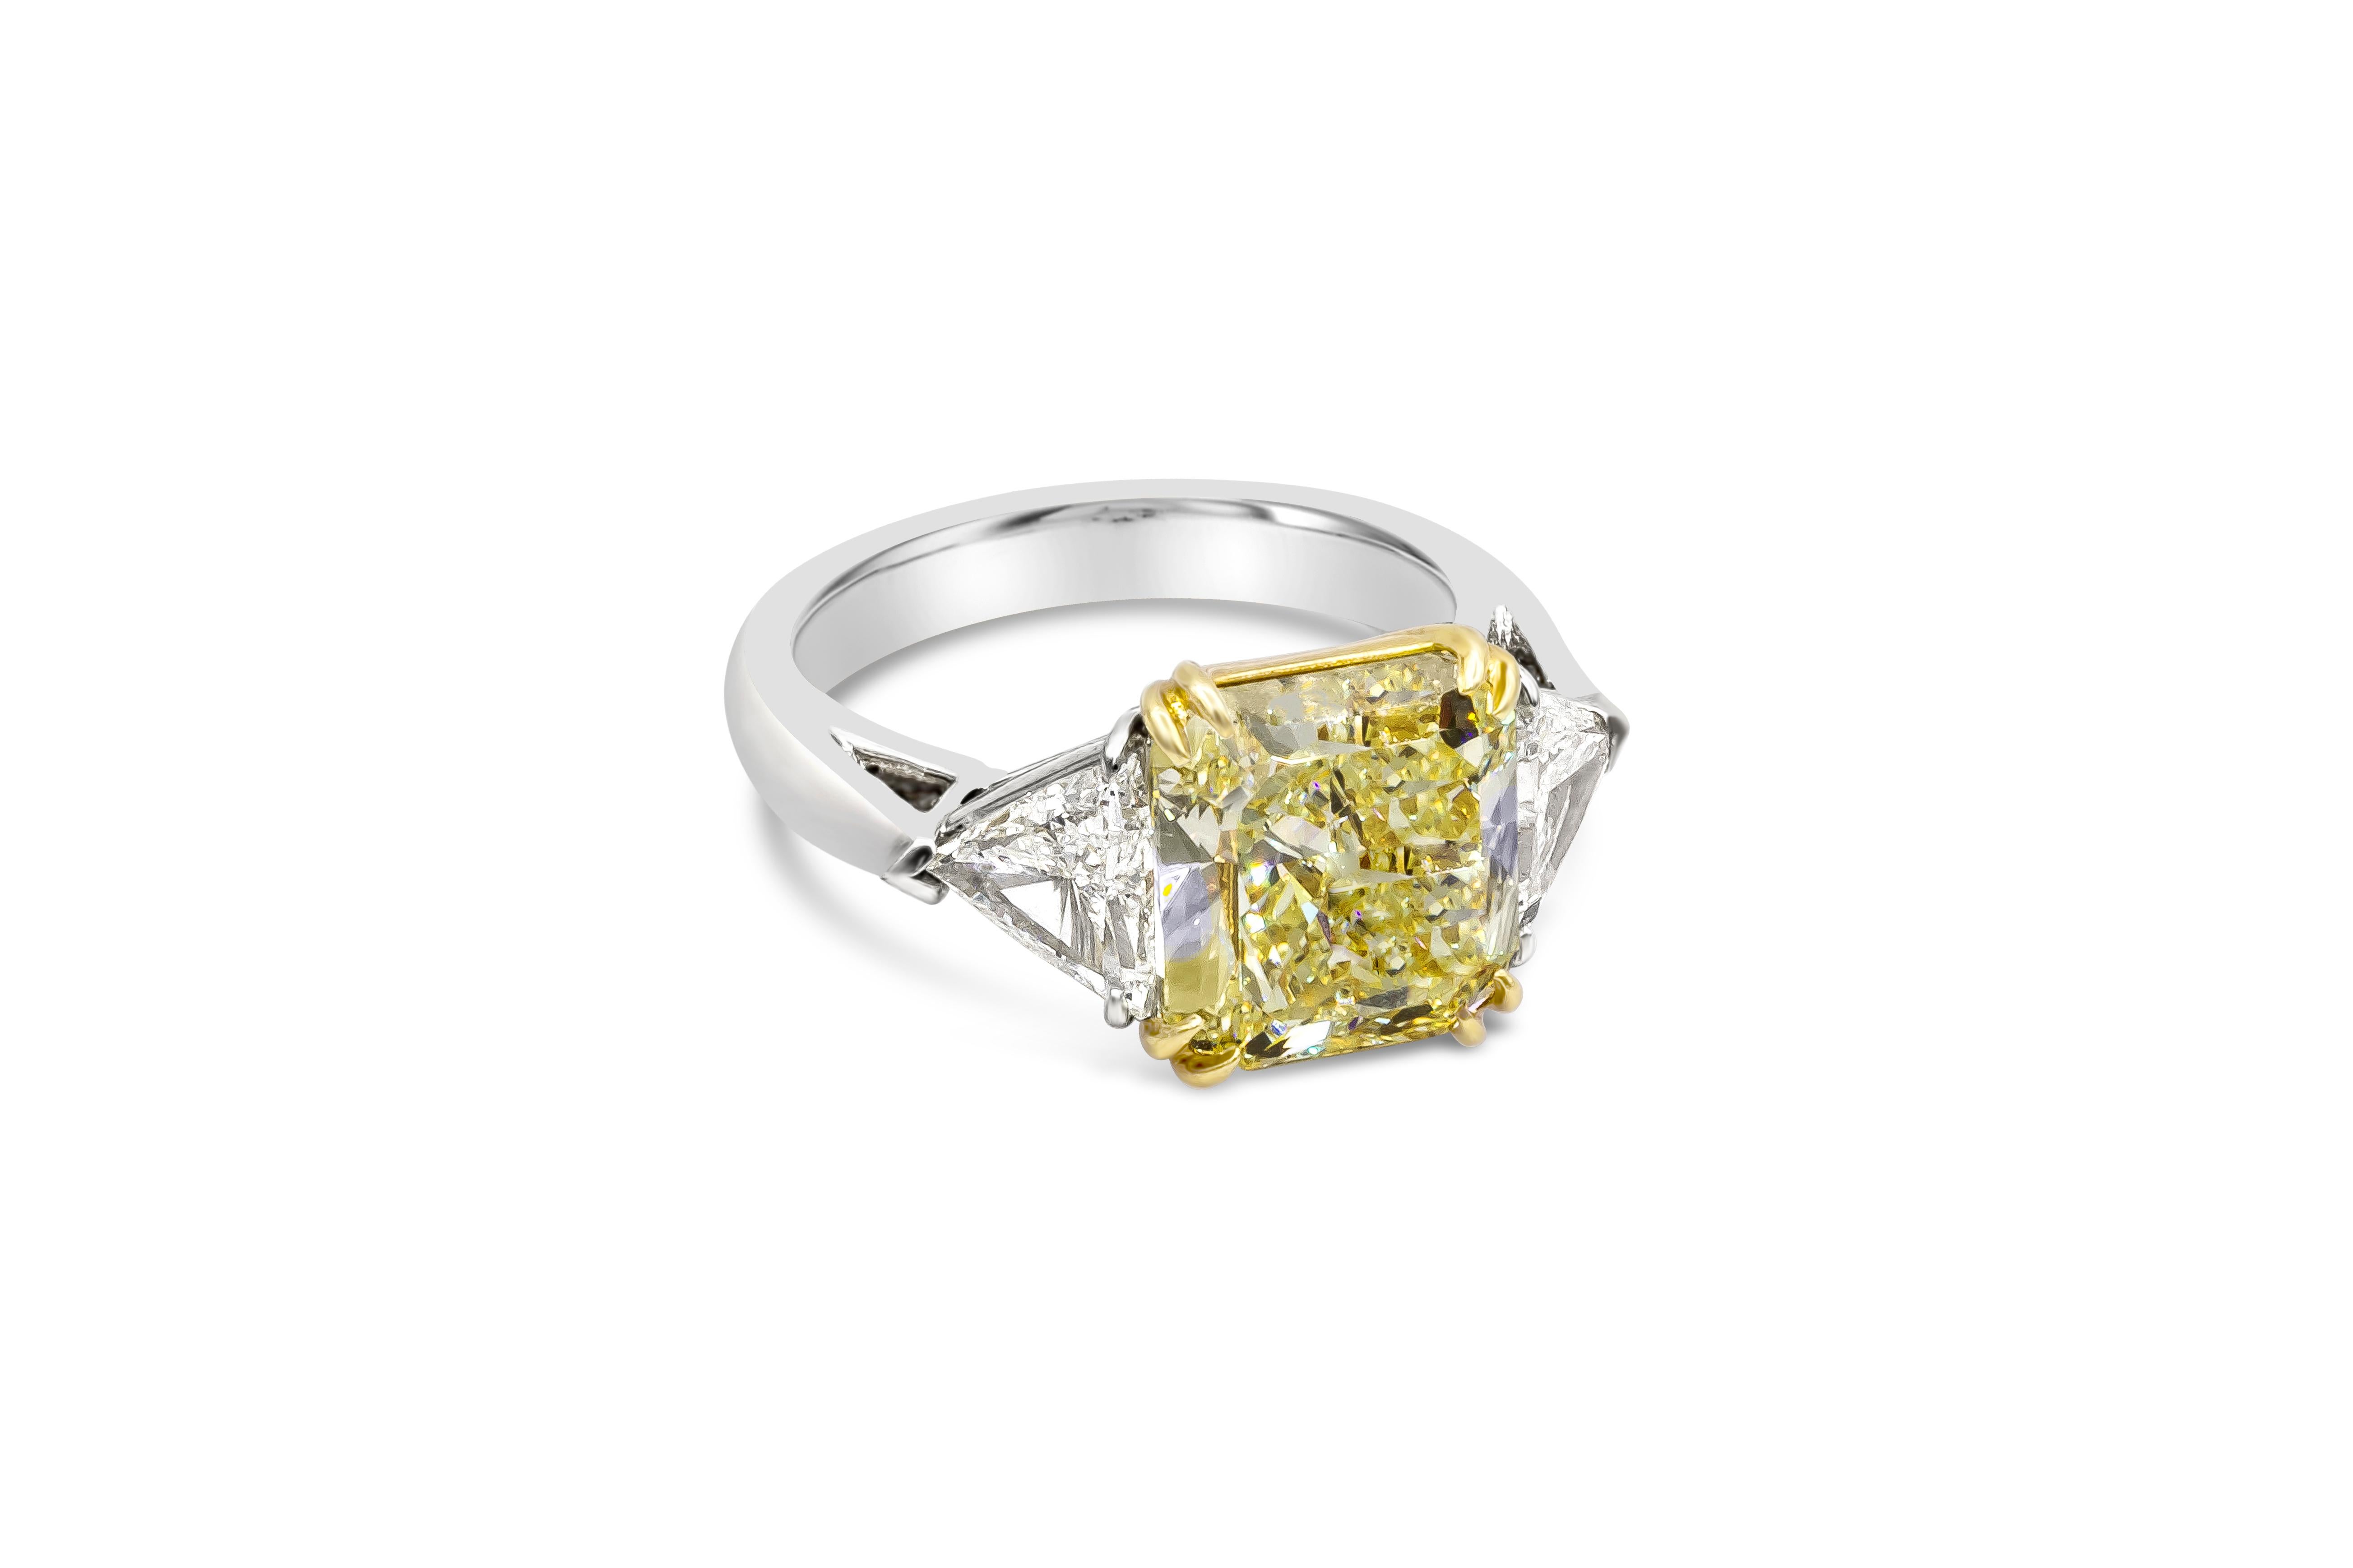 This elegant three-stone engagement ring features 4.50 carat radiant cut yellow diamond, certified by GIA as Fancy Yellow color, VS1 in clarity. Flanking by brilliant trillion cut diamonds weighing 0.99 carat total. Set in a polished platinum